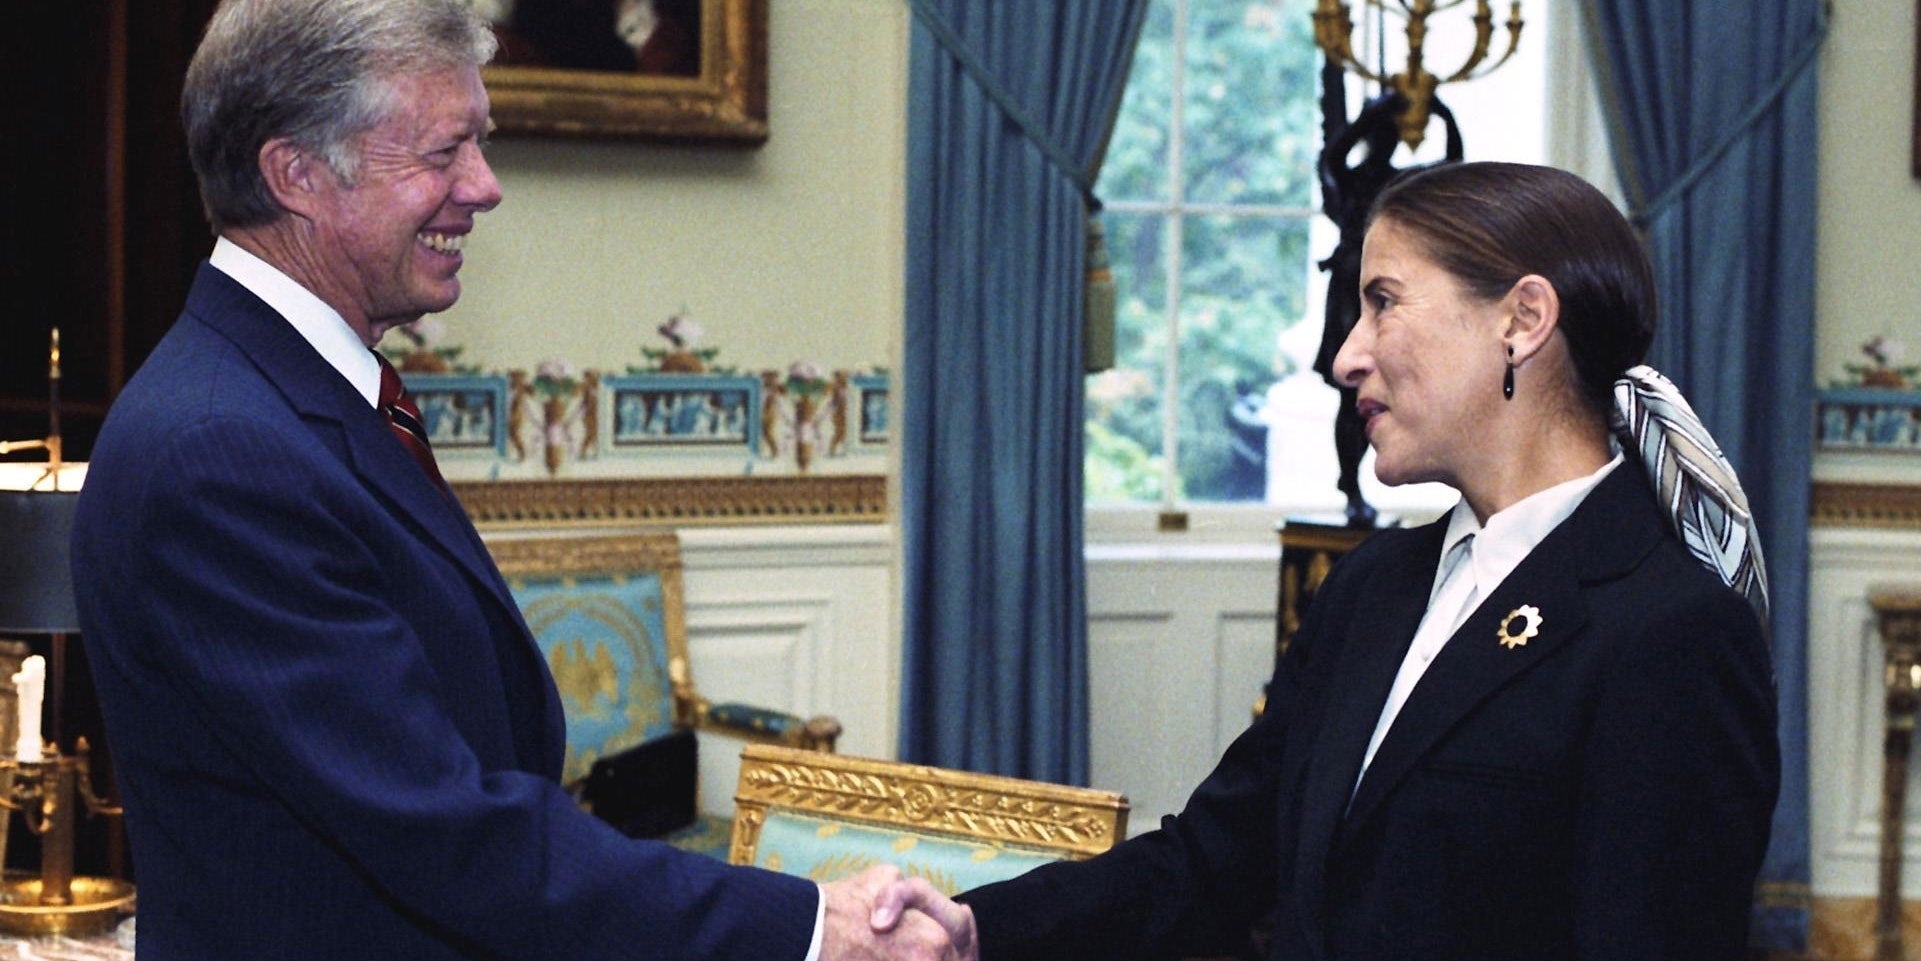 Jimmy Carter shakes Ruth Bader Ginsburg’s hand in an archival photo.